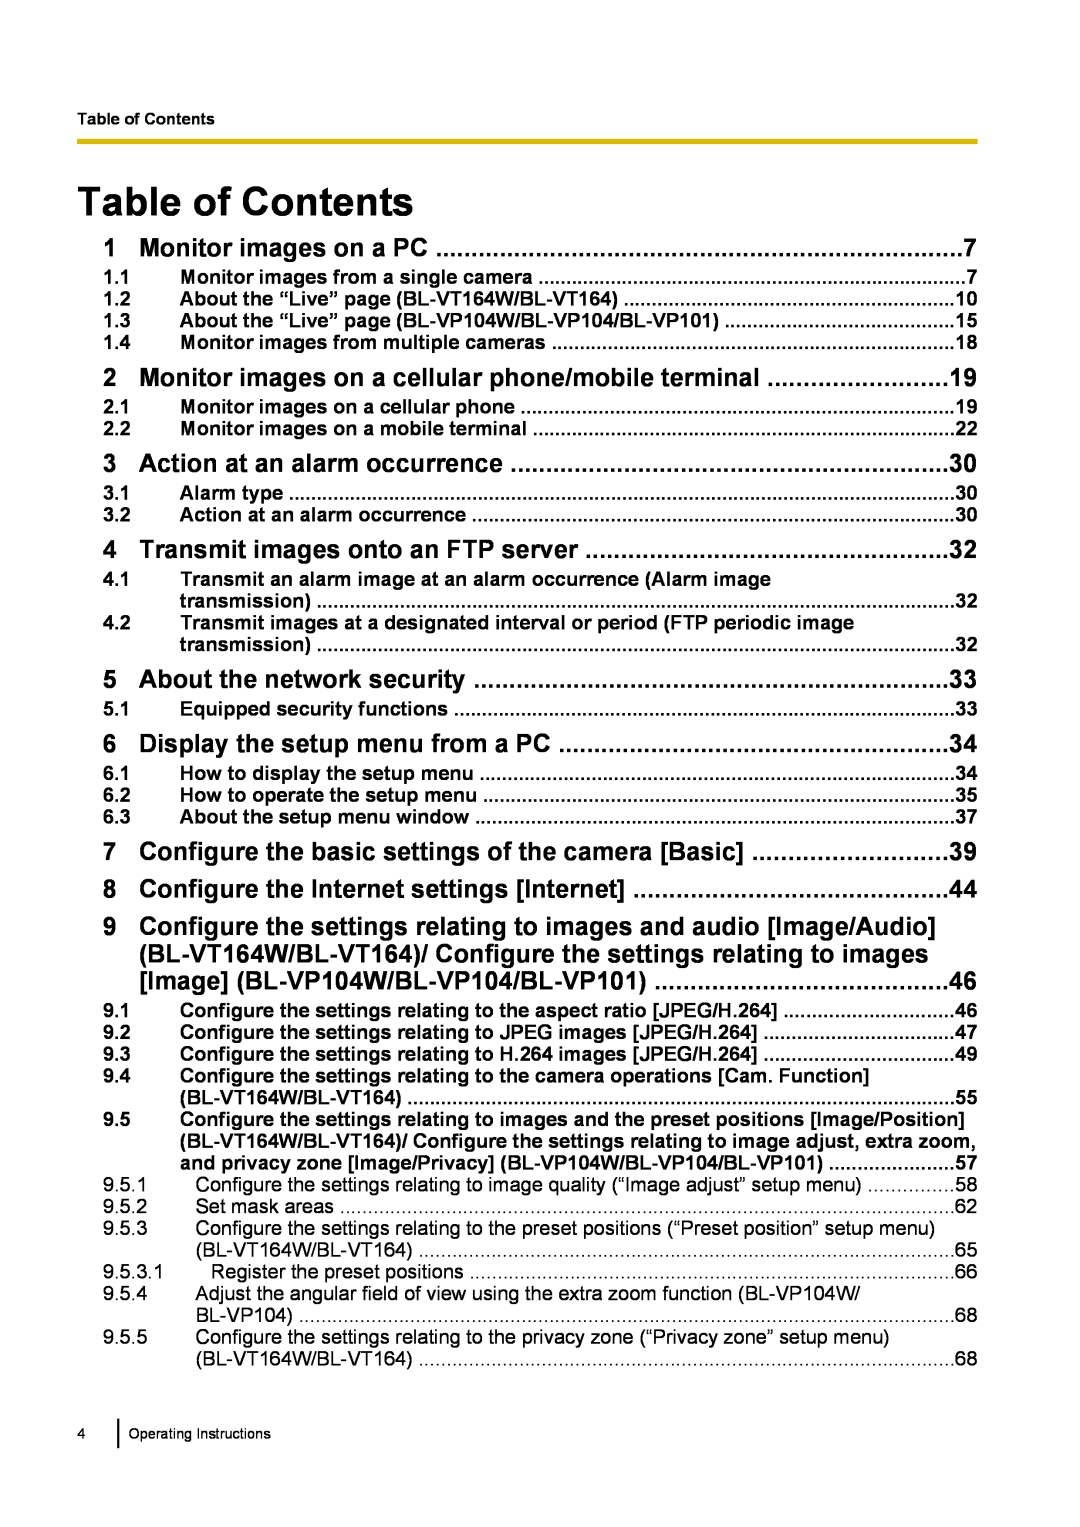 Panasonic BL-VT164 Table of Contents, Monitor images on a PC, About the network security, Display the setup menu from a PC 